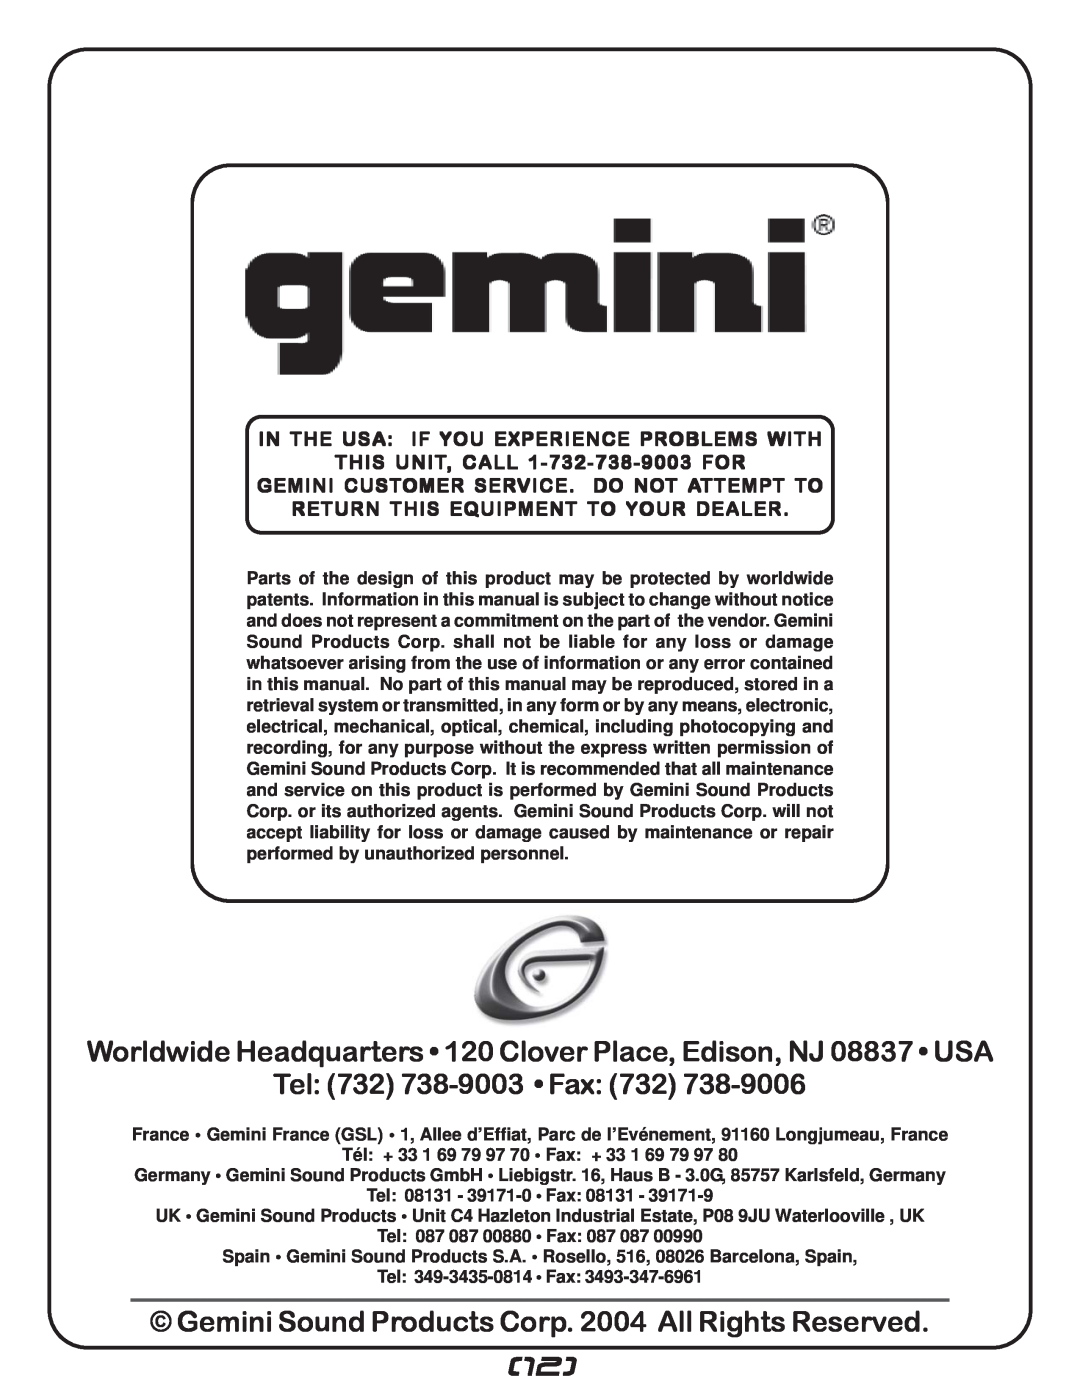 Gemini CDJ-15X manual Tel 732 738-9003 Fax, In The Usa If You Experience Problems With, THIS UNIT, CALL 1-732-738-9003FOR 